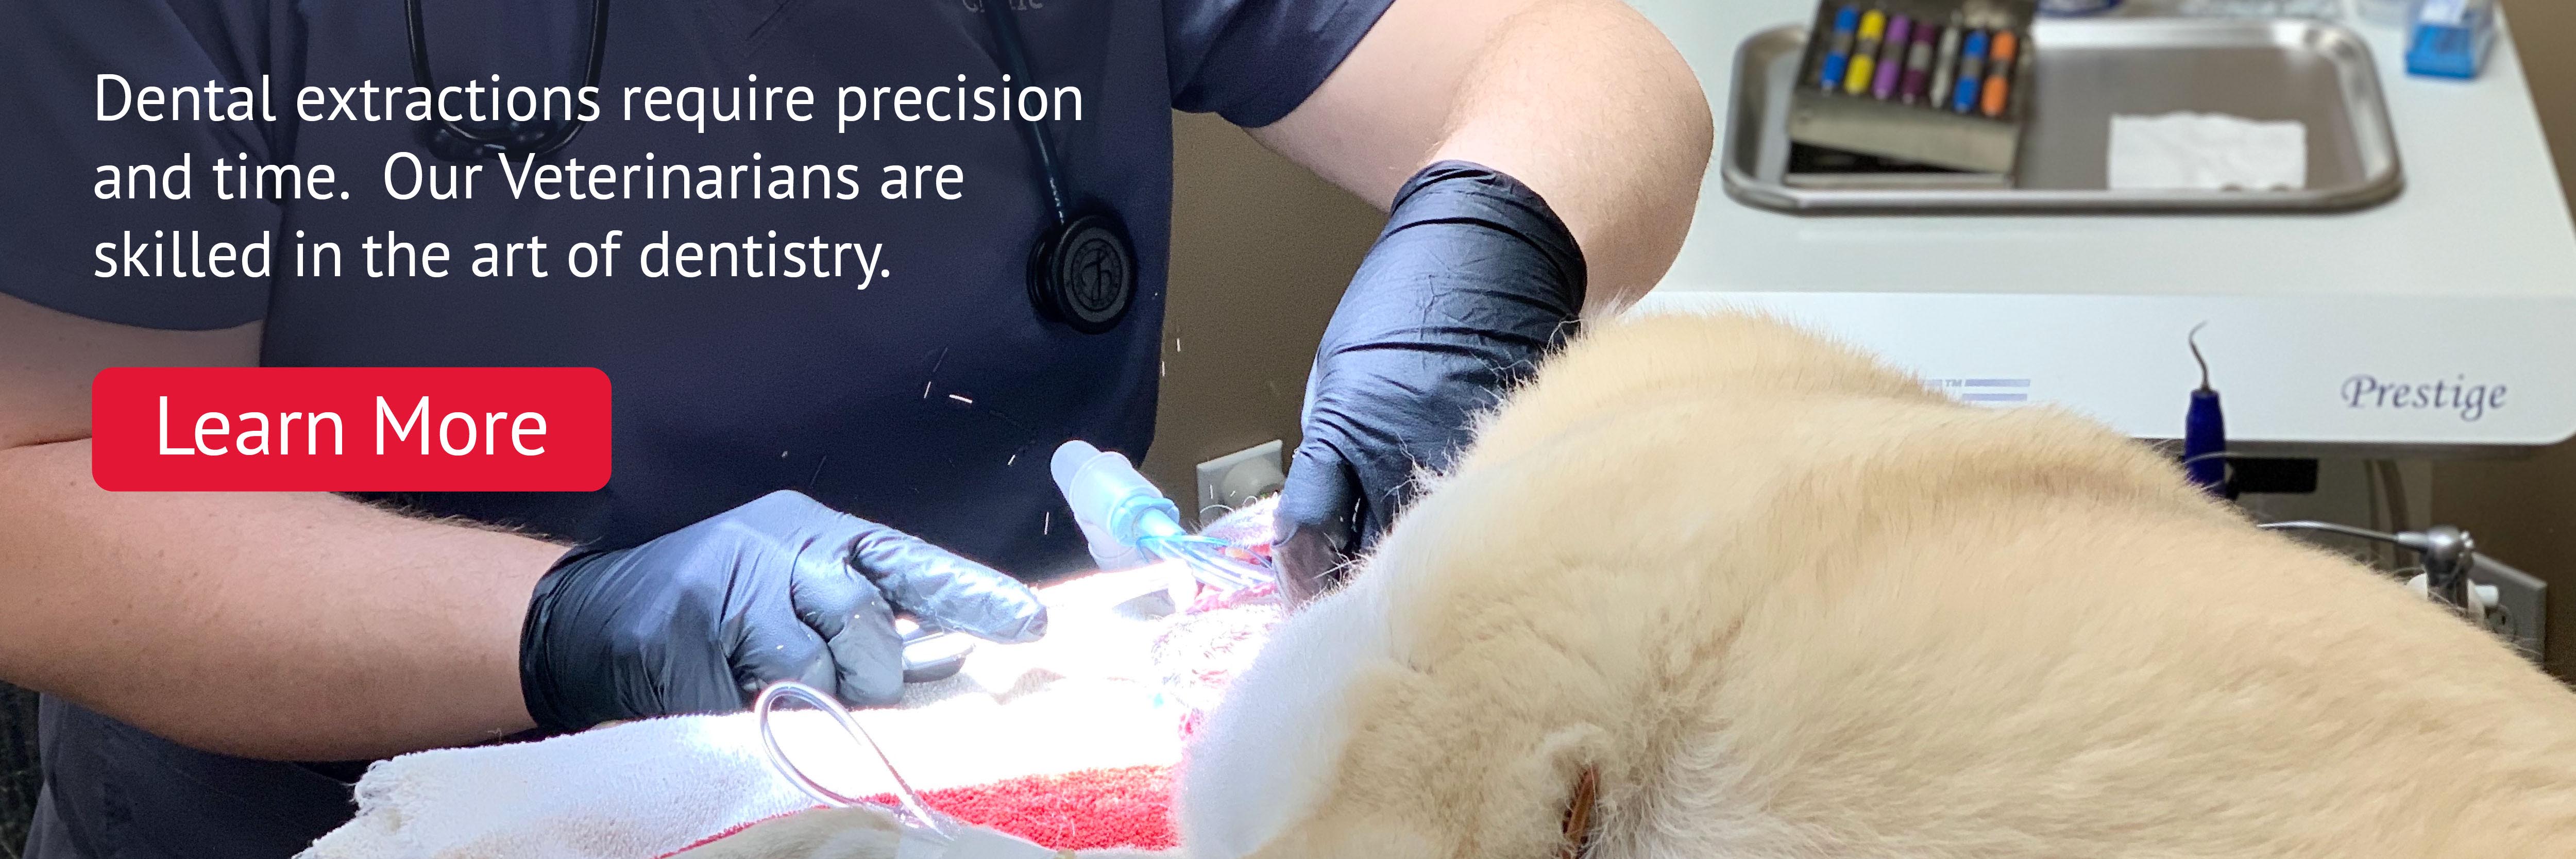 Our Veterinarians are Skilled in the Art of Dentistry